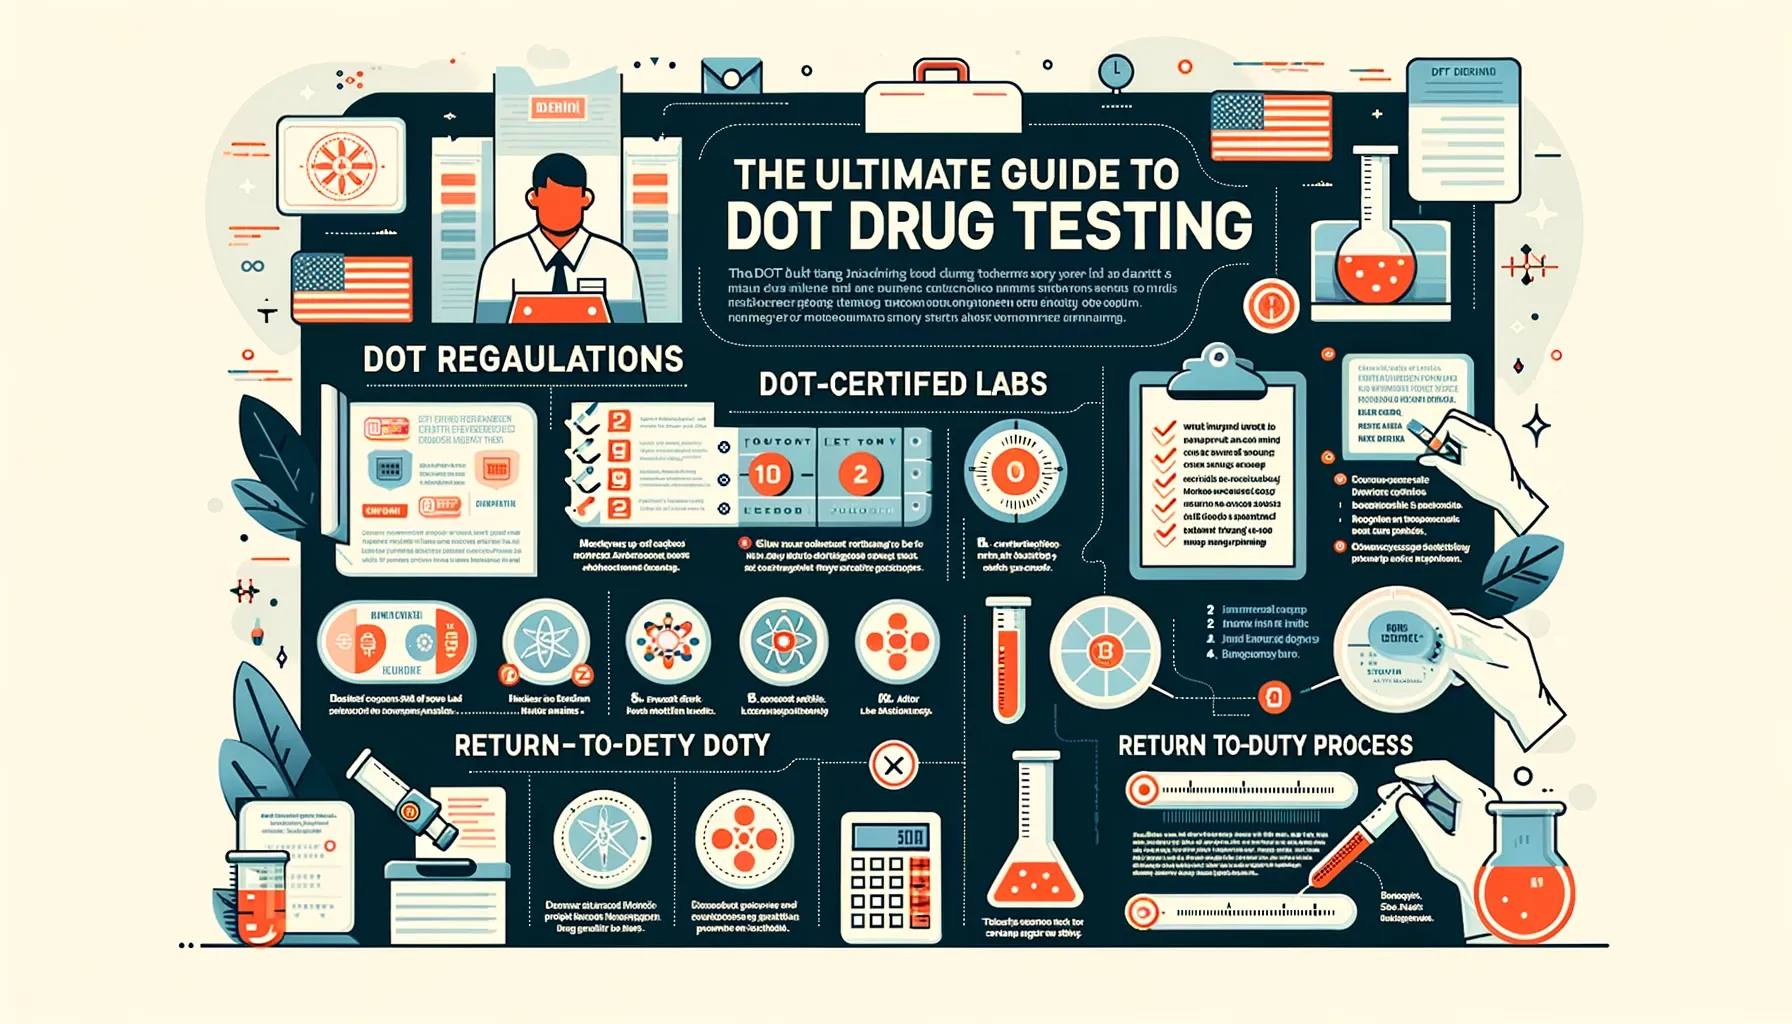 The Ultimate Guide to DOT Drug Testing – What You Need to Know